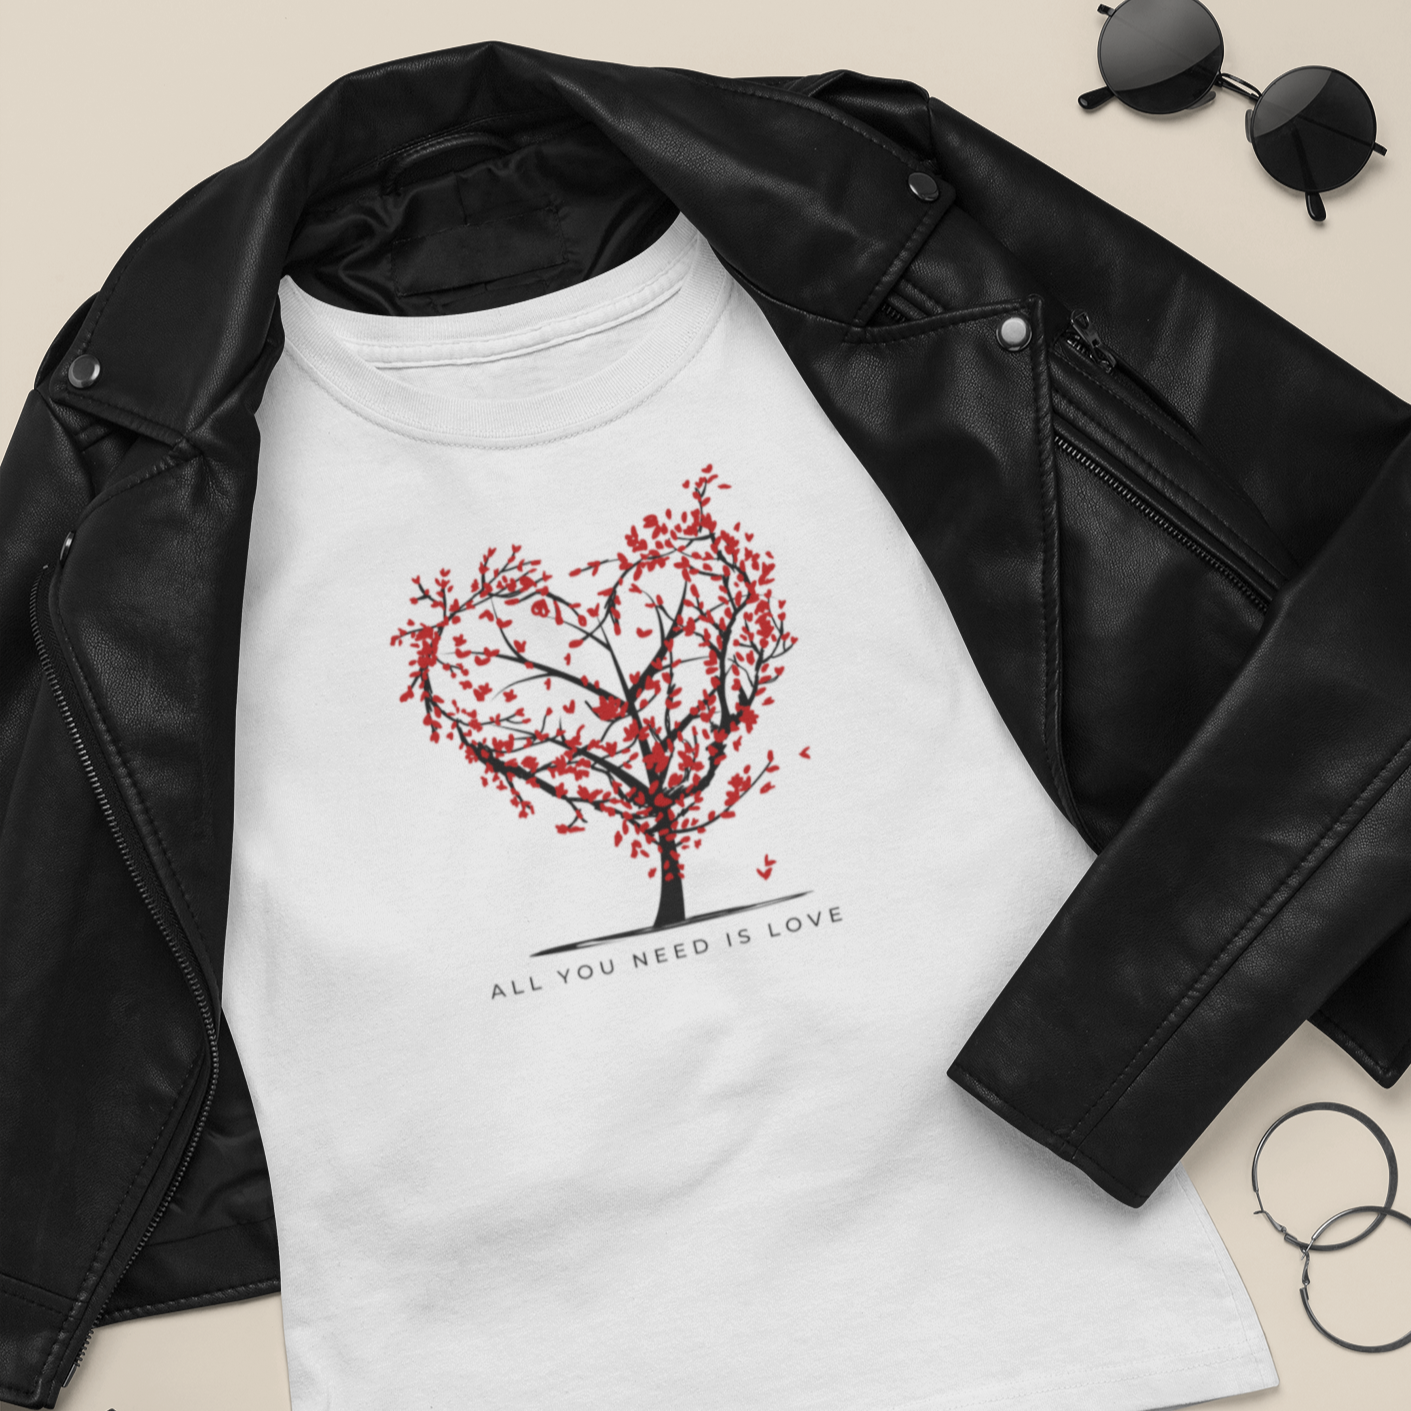 Story of Awakening Lifestyle Community Spirituality Relationships Love Light Meditation Oneness Earth Balance Healing Shop Store Charity Tree Nature Read Write T shirt Tops Tees Clothing Women Horoscope All you need is love quote Valentines Day